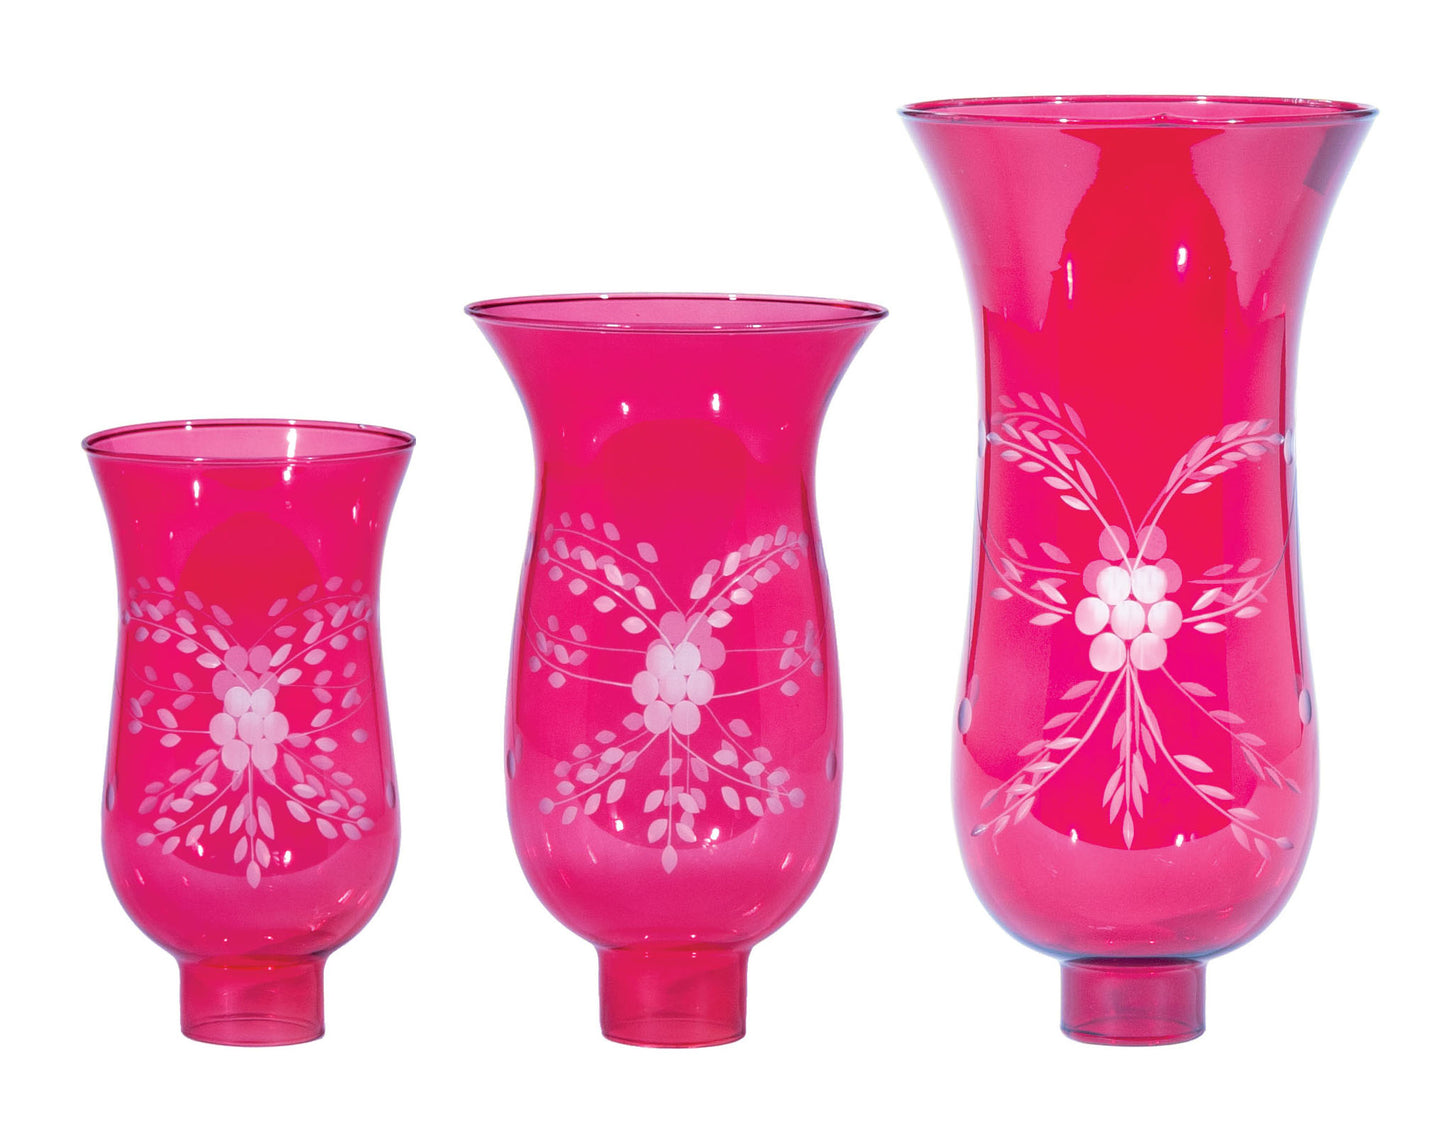 Cranberry Hurricane Shade or Globe Cut Flowers Design, 1-5/8" Fitter Size